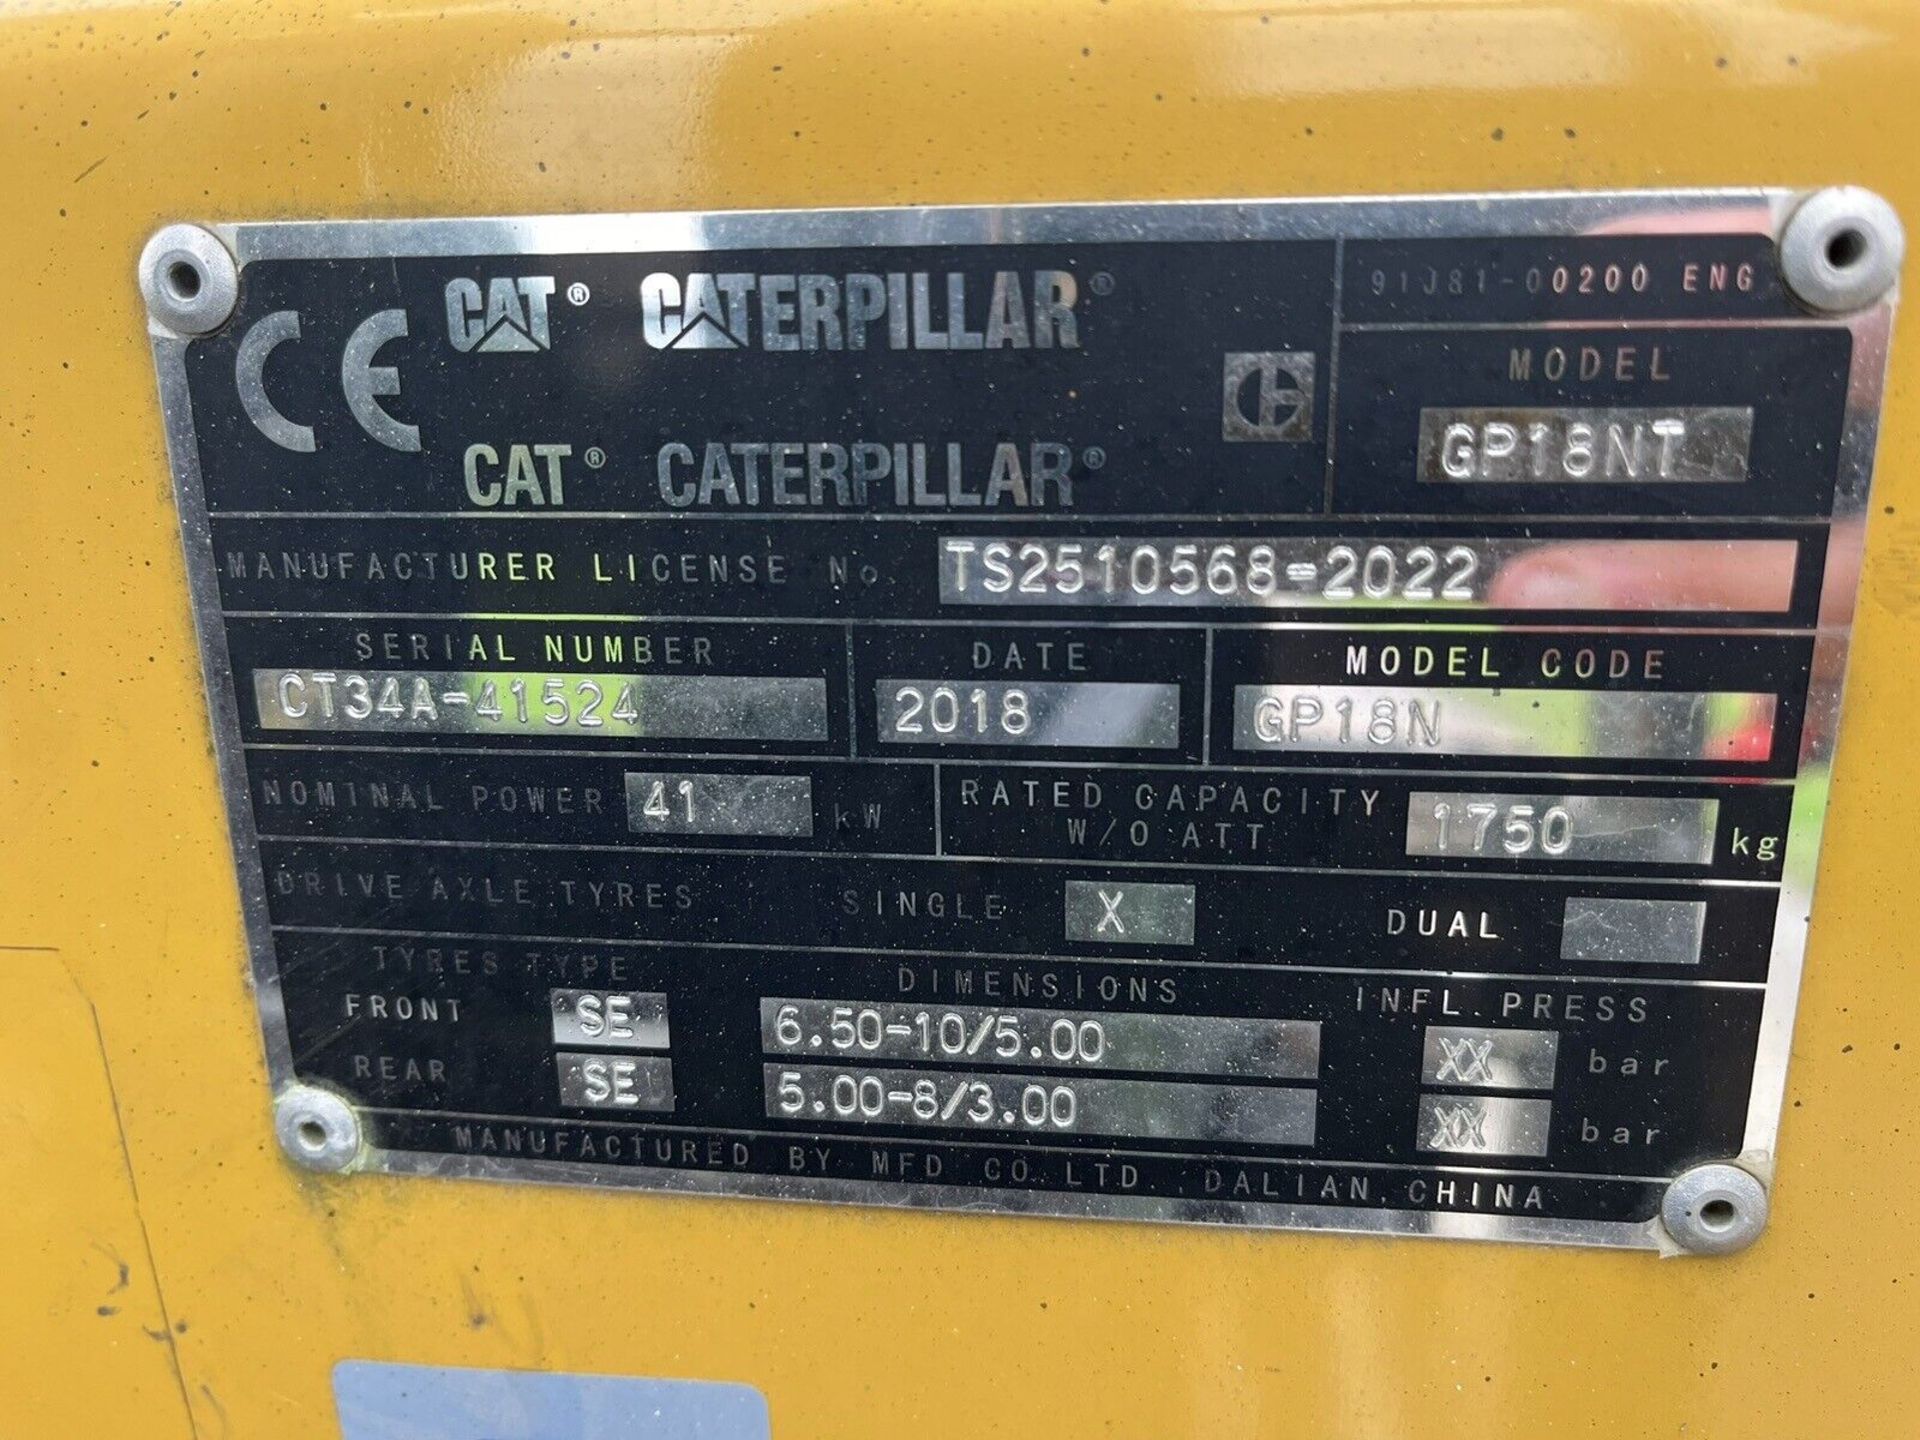 2018 CATERPILLAR 1.8 Tonne Gas Forklift Truck (Container) Triple Mast - Image 3 of 4